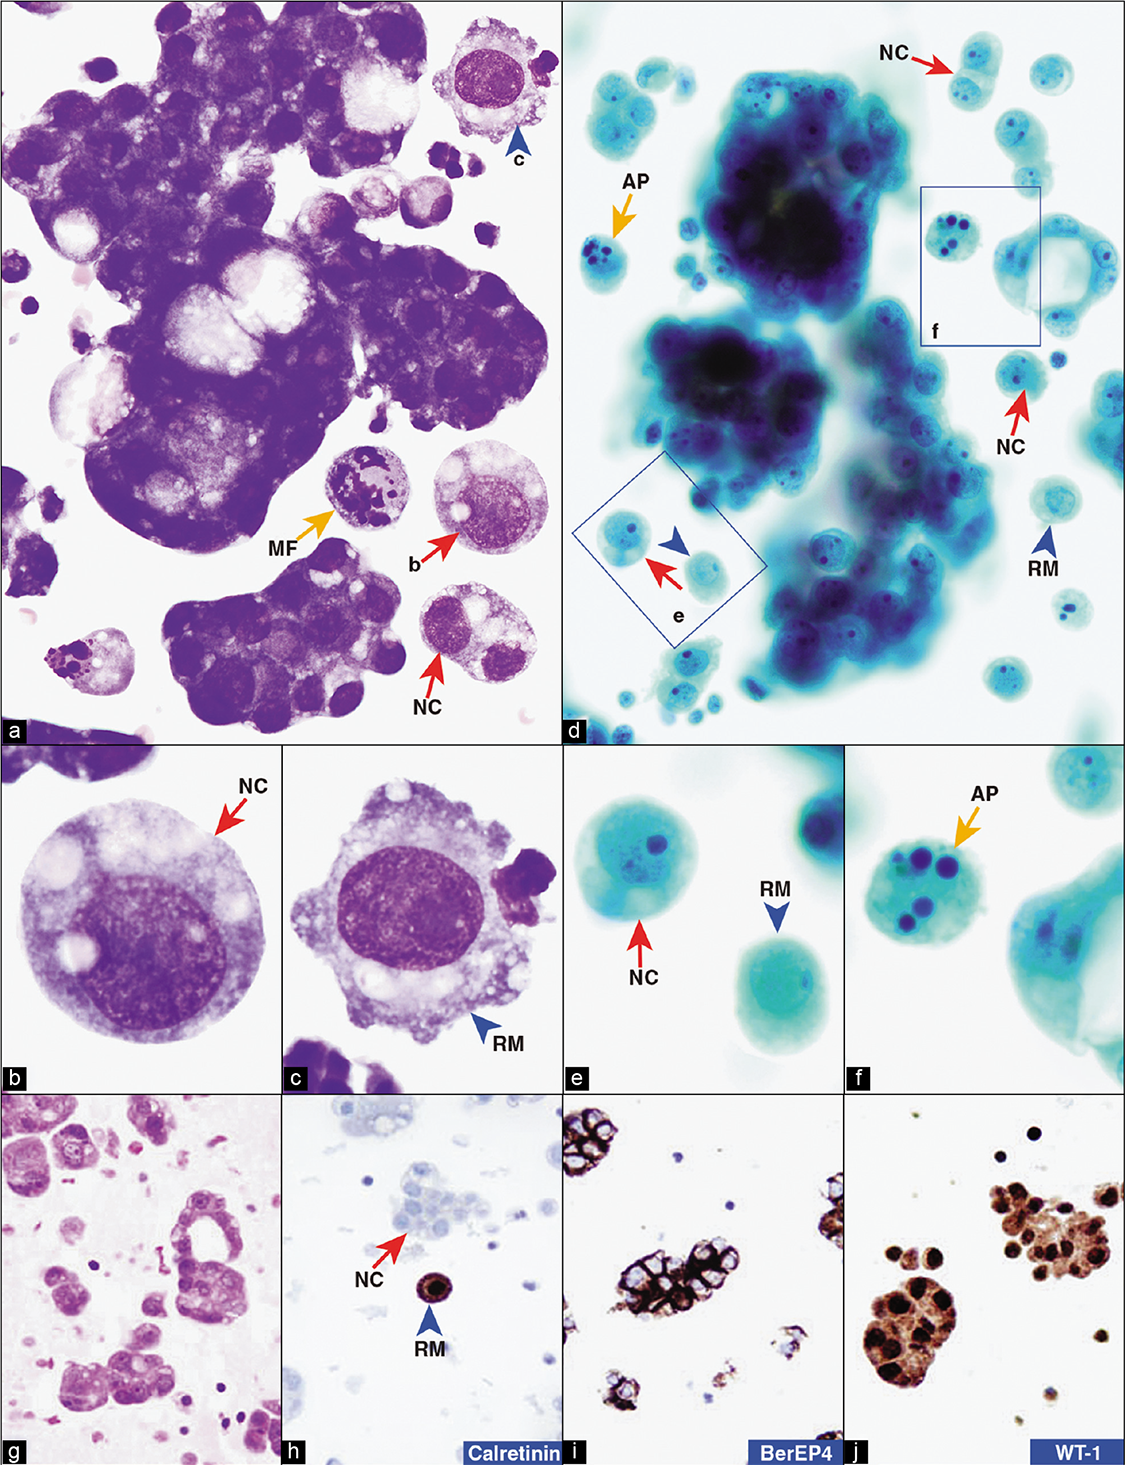 Primary peritoneal carcinoma, peritoneal fluid. The specimen shows a predominance of adenocarcinoma cells in papillary configurations (a,d) without stromal cores (g). Solitary neoplastic cells (red arrows NC in a,b,d,e) are easily distinguished from the rare reactive mesothelial cells (blue arrowheads RM in c,d,e). However, in PAP-stained preparation (d), reactive mesothelial cells (arrowhead RM in e) have significant morphologic overlap with neoplastic cells (red arrows NC in d,e). Mitotic figures (yellow arrow MF in a) and apoptotic cells (yellow arrows AP in d,f) are present concurrently. Some cells show degenerative vacuolation (a,b). These vacuoles may resemble secretory vacuoles and lead to misinterpretation as mucinous adenocarcinoma. The cancer cells do not show nuclear immunoreactivity for calretinin (h), but they are immunoreactive for BerEP4 (i). The neoplastic cells show nuclear (and cytoplasmic) immunoreactivity for WT-1(j). The patient had ascites with diffuse peritoneal involvement with omental caking. The ovaries were not enlarged. AP, apoptotic cancer cell; MF, mitotic figure; NC, neoplastic cell; RM, reactive mesothelial cell. [a–c, DQ-stained Cytospin smear; d–f, PAP-stained SurePath smear; g, HE-stained cell-block section; h–j, immunostained cell-block sections (a, 100X; b,c, 100X zoomed; d, 100X; e,f, 100X zoomed; h–j, 100X).]